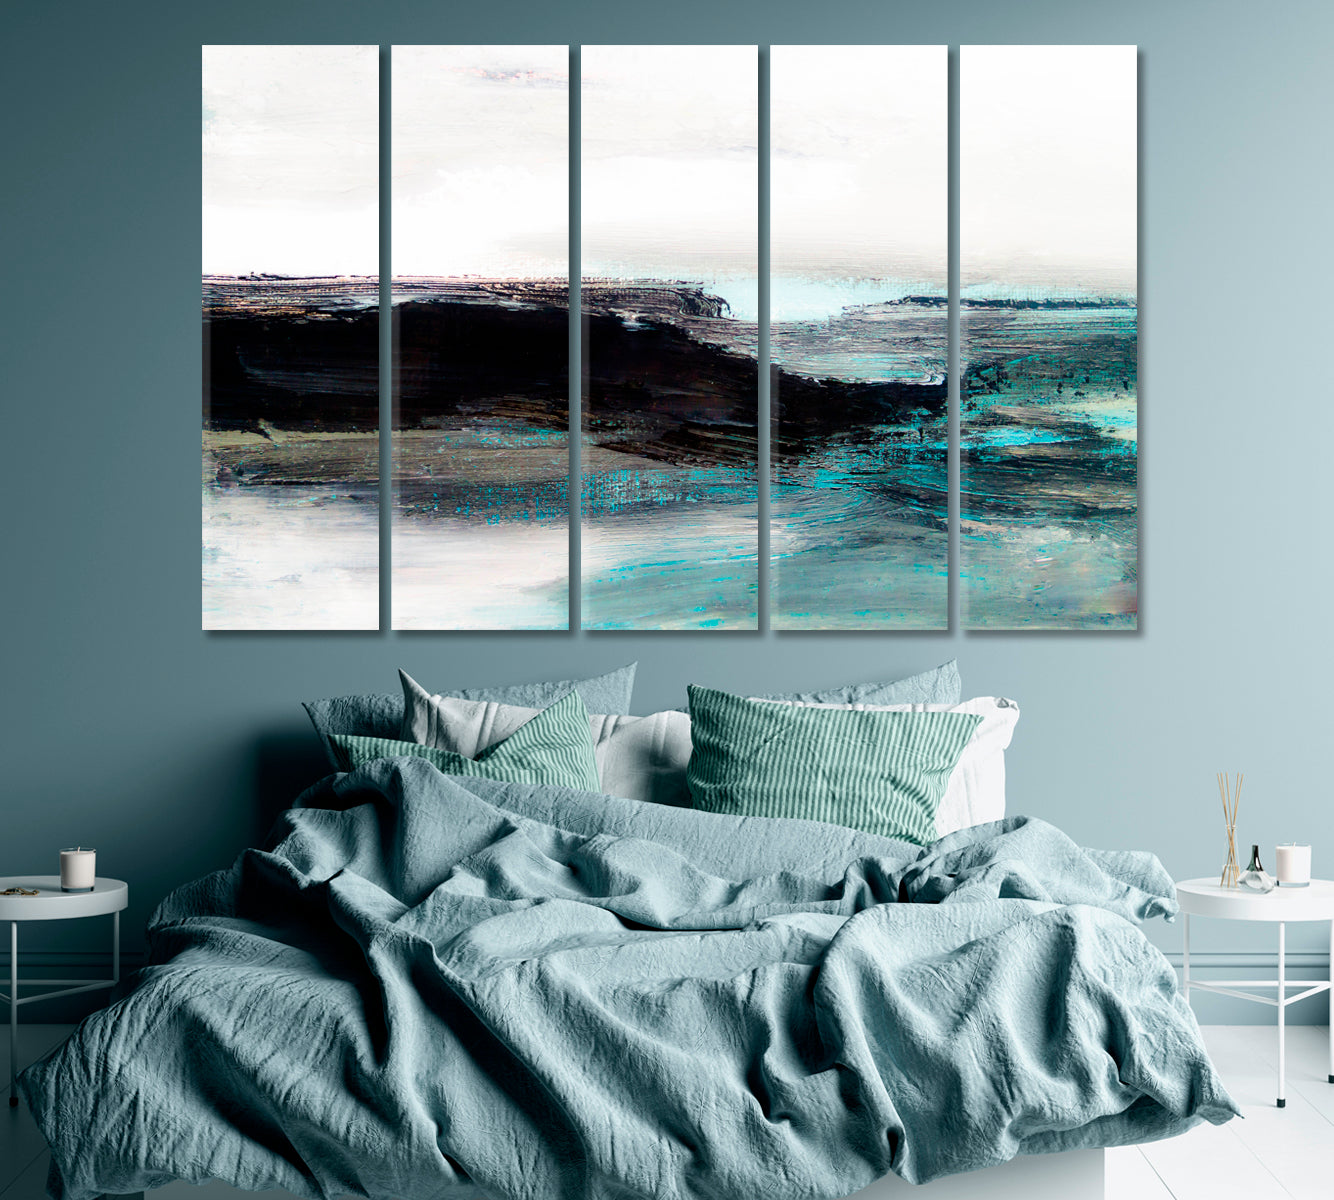 Abstract Sea Landscape Canvas Print ArtLexy 5 Panels 36"x24" inches 